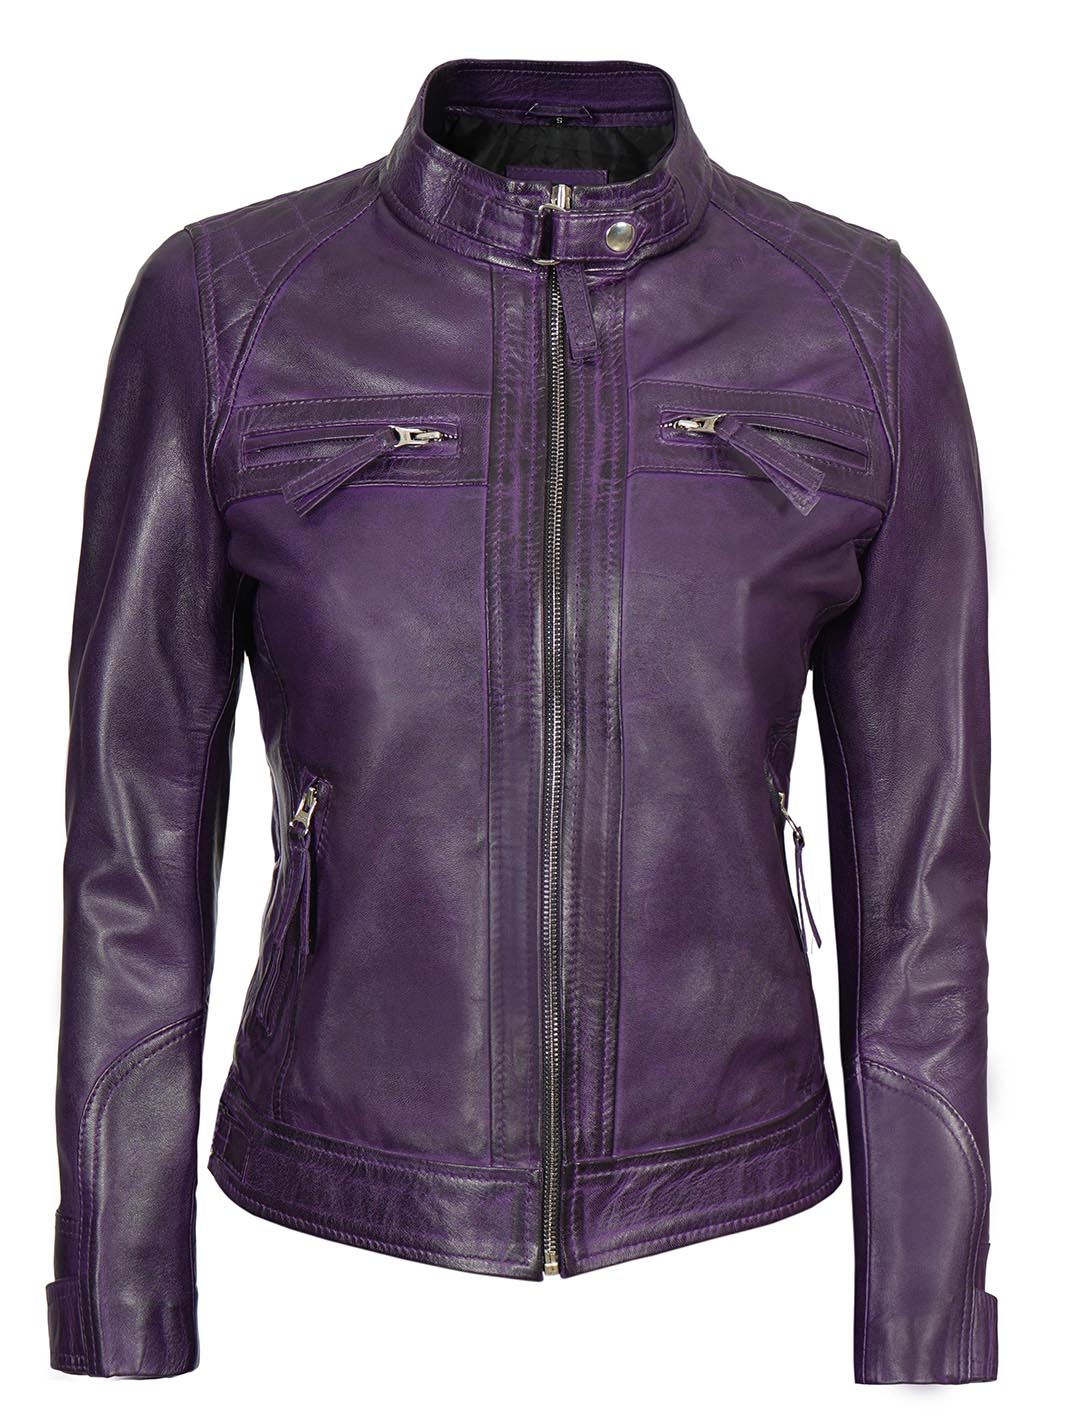 Womens quilted purple leather jacket